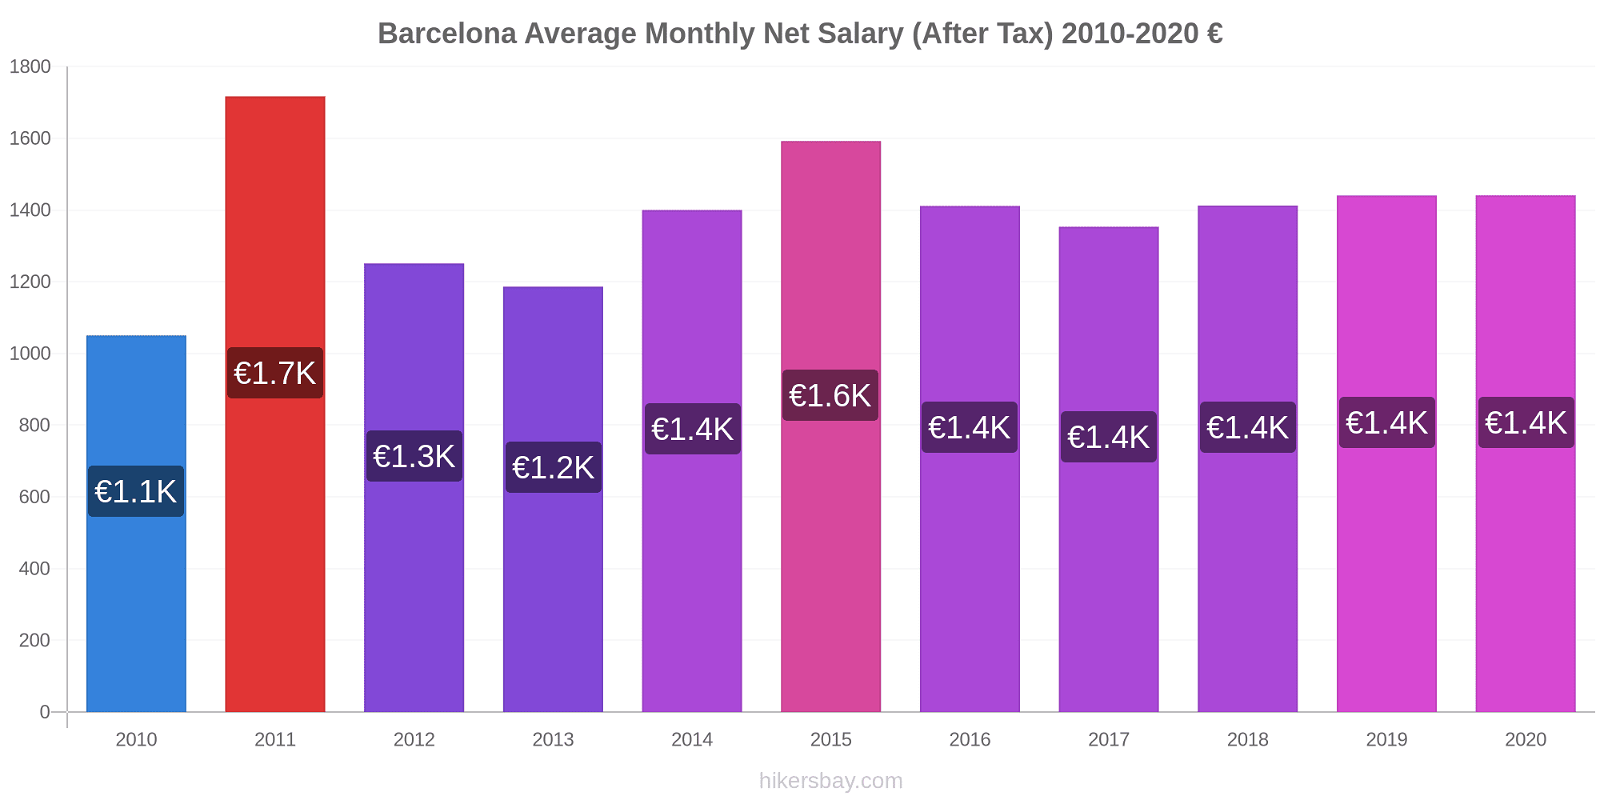 Barcelona price changes Average Monthly Net Salary (After Tax) hikersbay.com